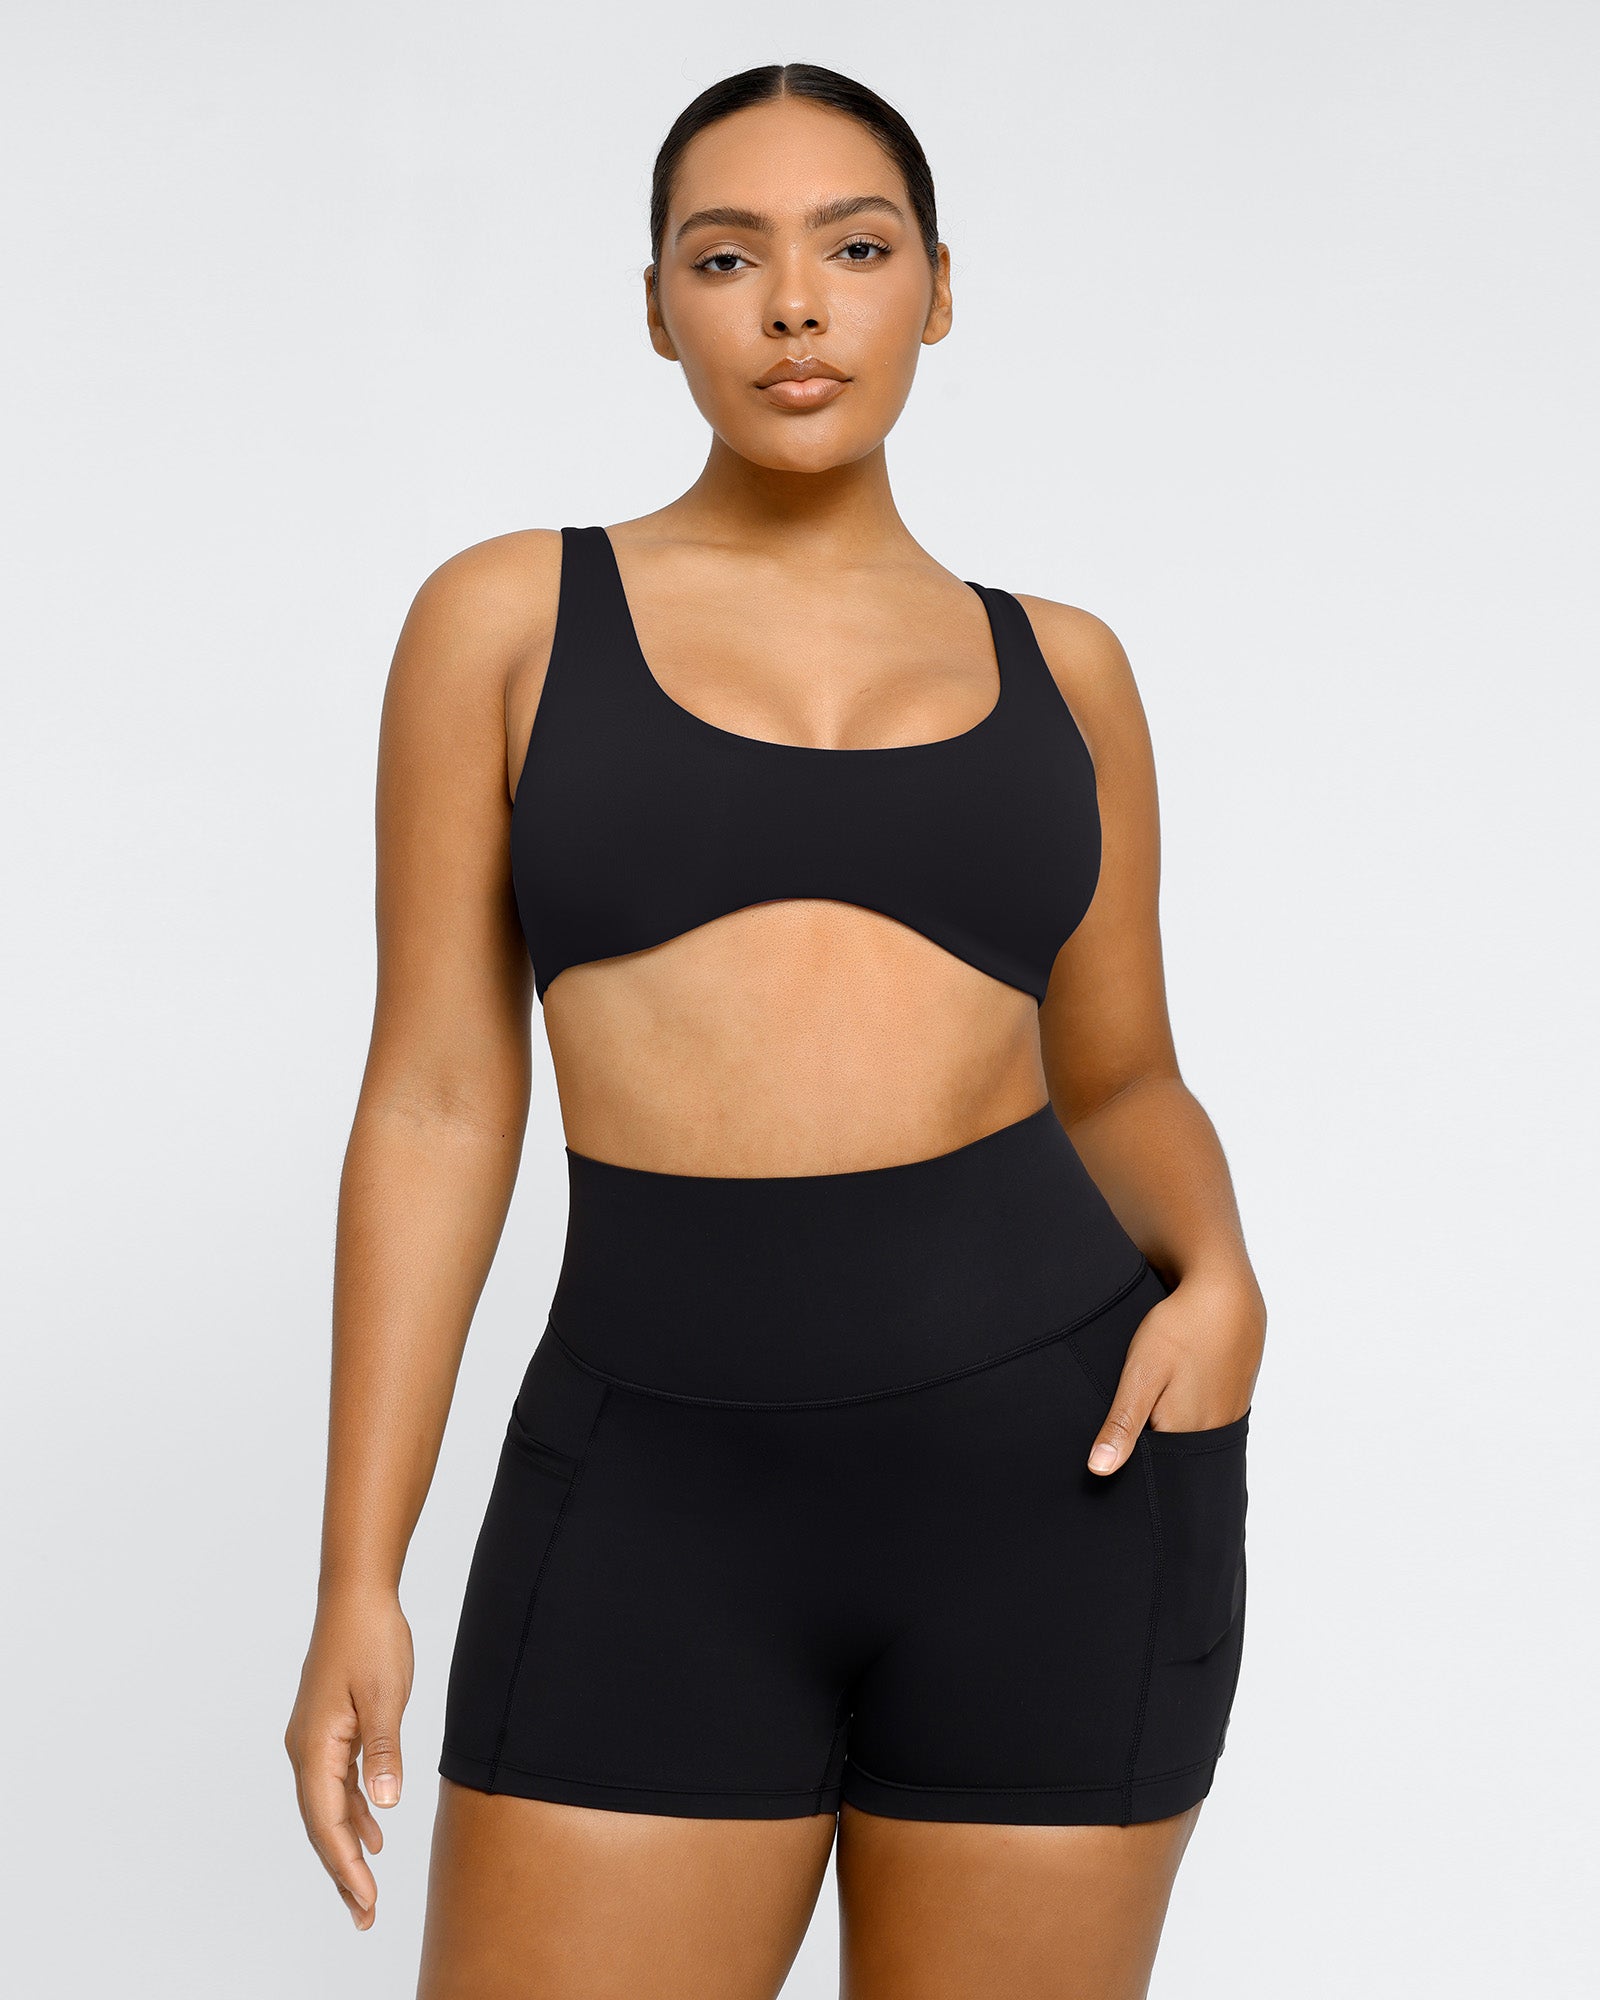 Say goodbye to uncomfortable workouts with Cosmolle activewear